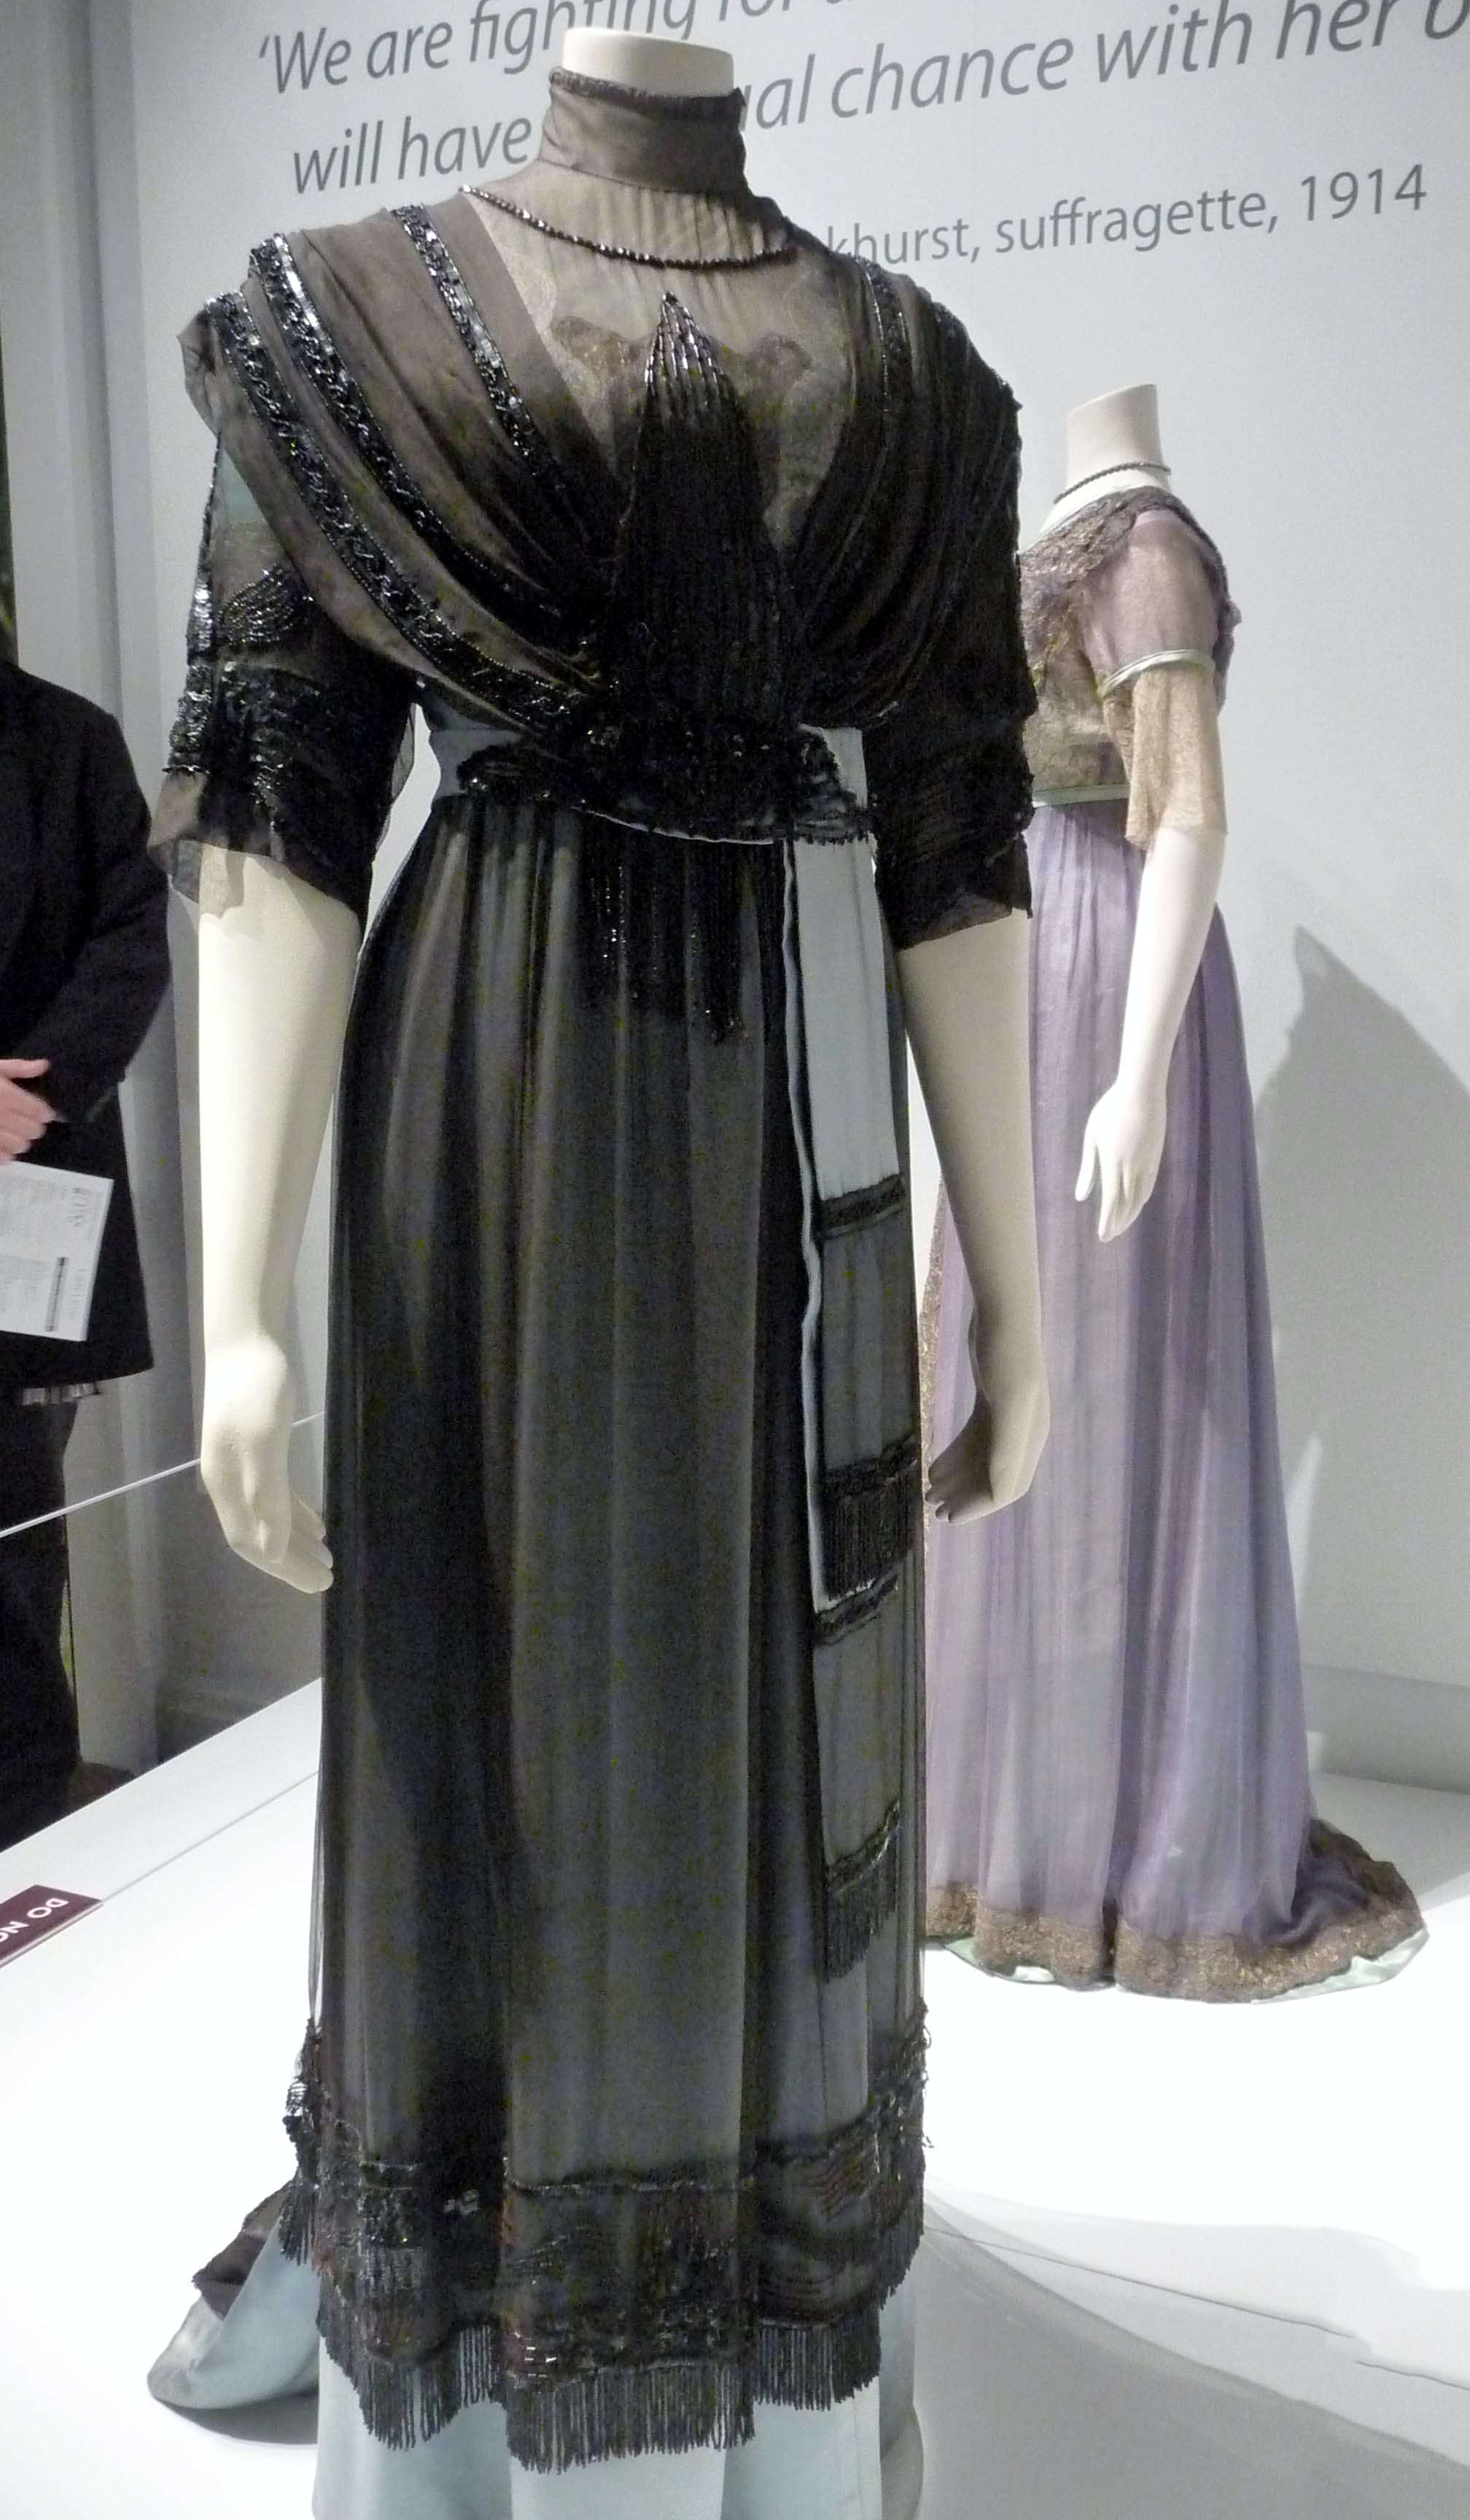 EVENING DRESS WITH TRAIN, silk satin, silk chiffon and marquisite net, trimmed with celluloid sequins and glass bugle beads, made by T&S Bacon, Liverpool, 1910-12.